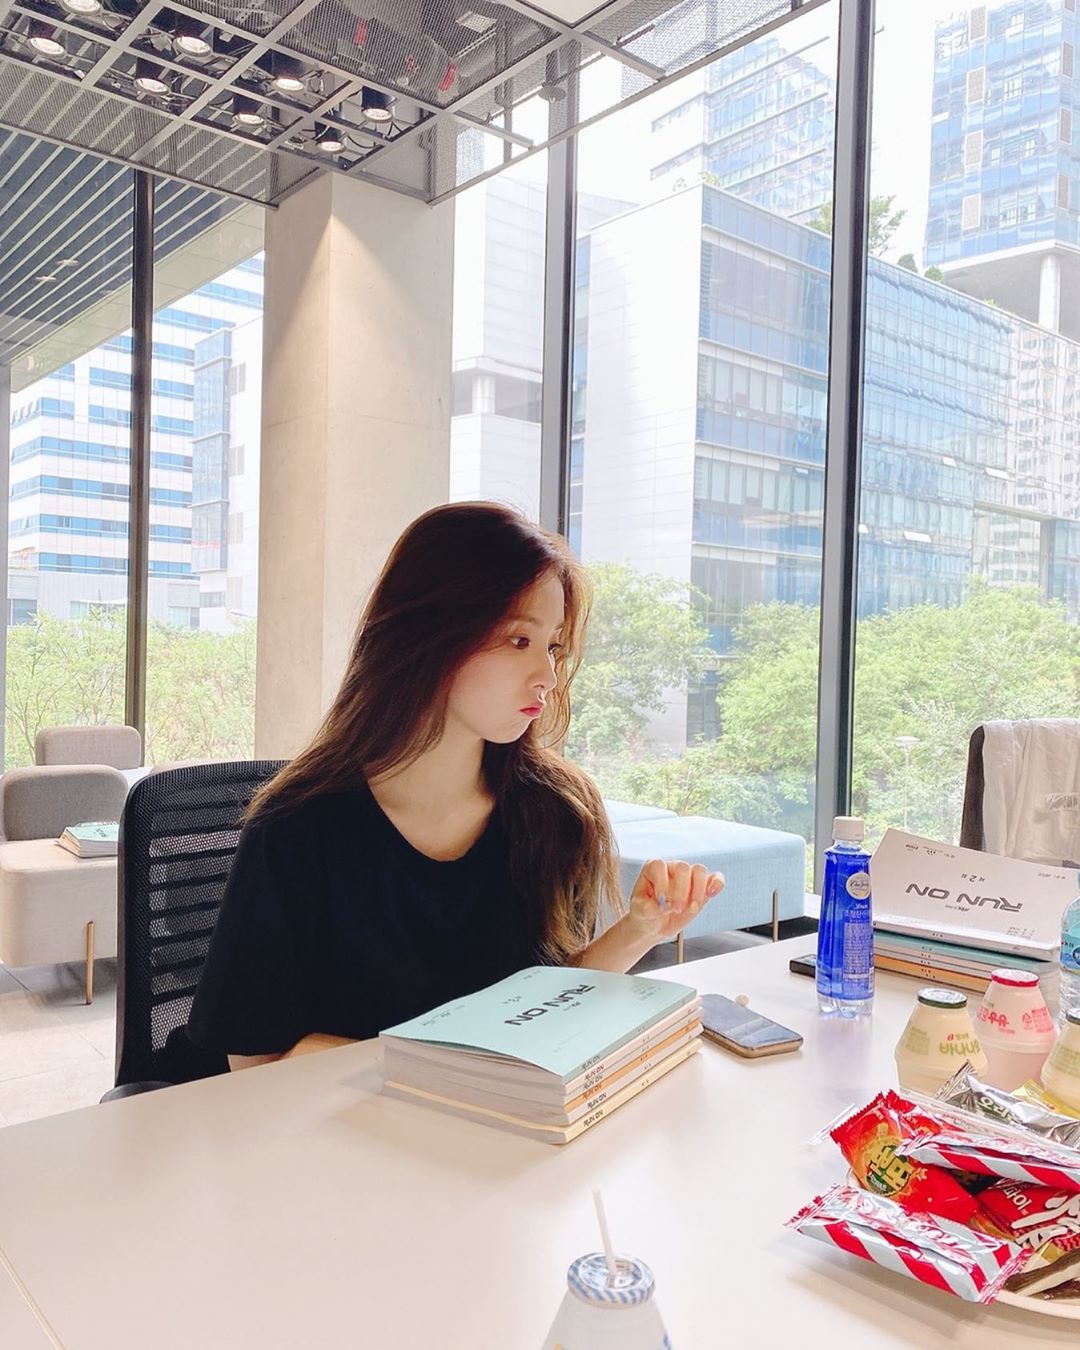 Shin Se-kyung is 19, their Instagram is the Best s to tags, and a picture showing.The revealed picture, Shin Se-kyung is sitting at a Desk somewhere and lips out there. Set before a script with Out script out of practice it seems.Shin Se-kyungs adorable visuals and unique atmosphere sees this as a good one.Shin Se-kyung is a YouTube channel Shin Se-kyung sjkukseeoperating in China.